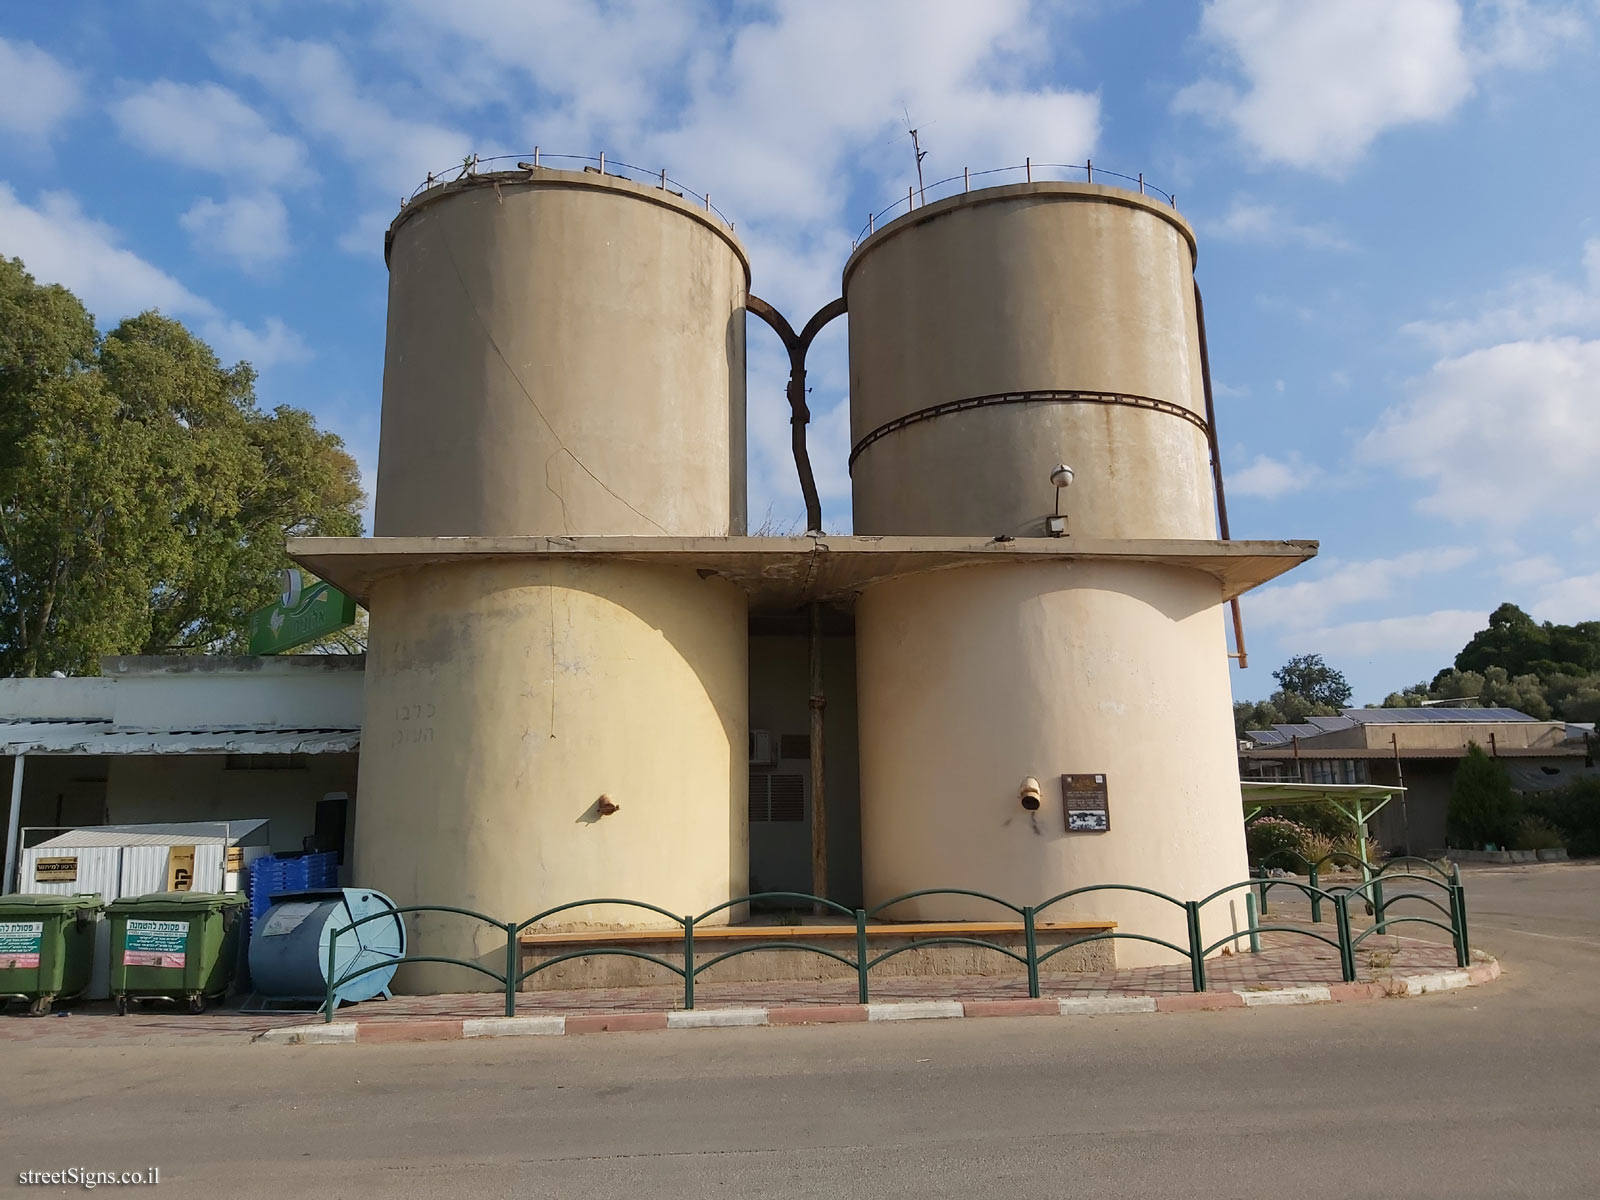 HaOgen - the structure and silo towers - HaOgen B, HaOgen, Israel